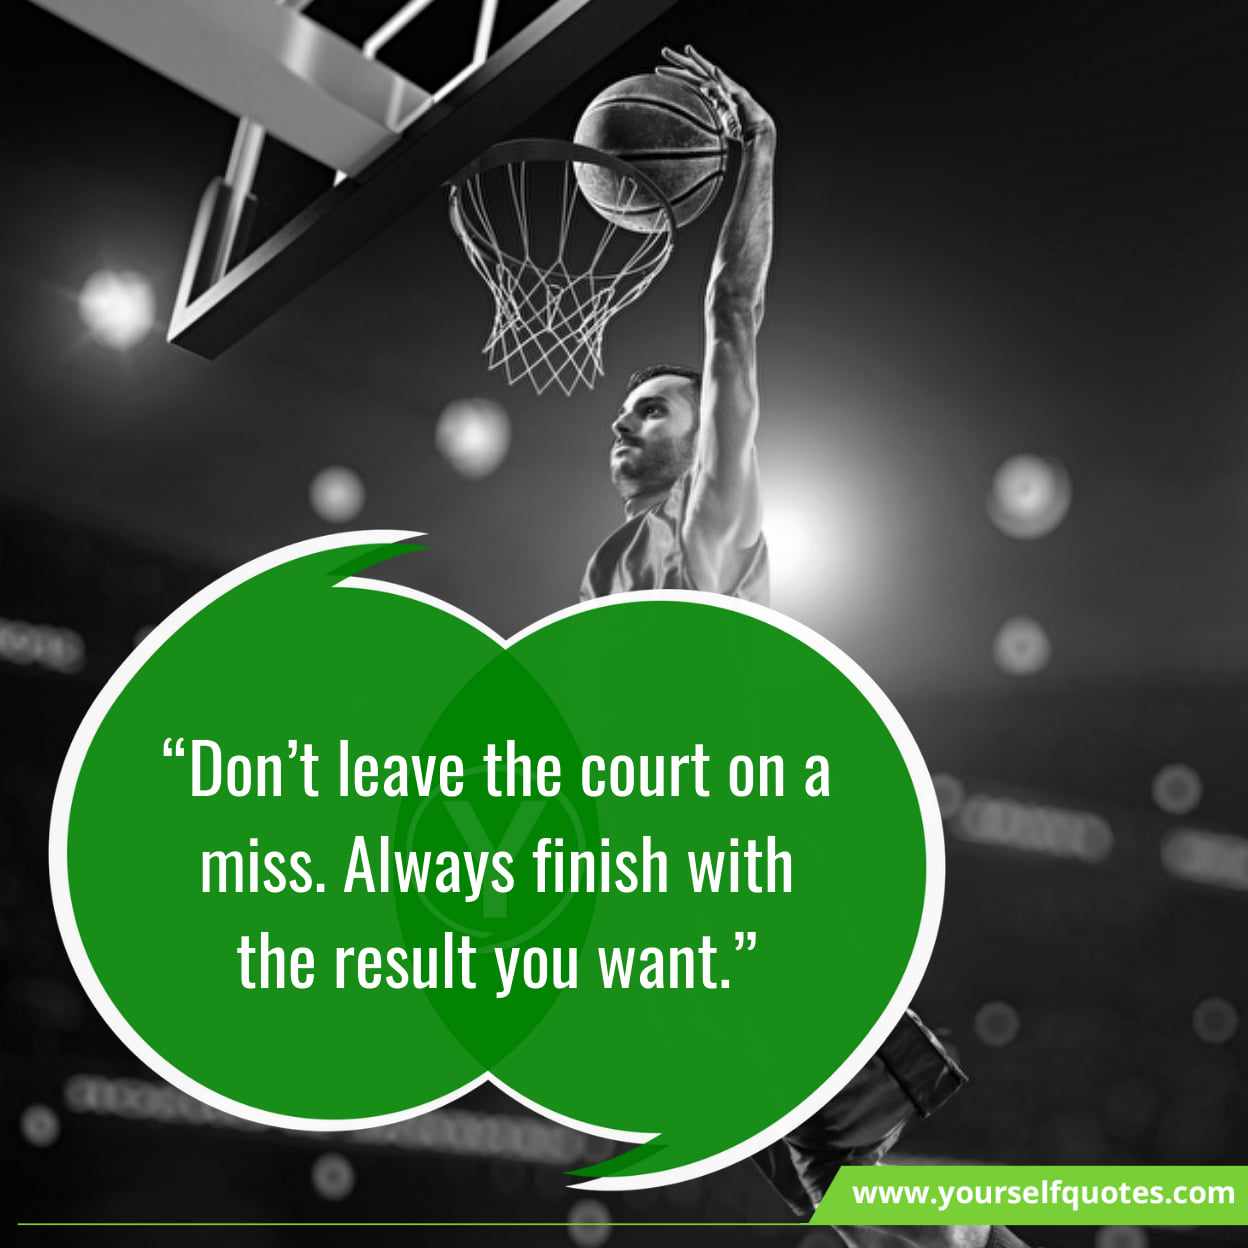 Motivational Basketball Quotes 